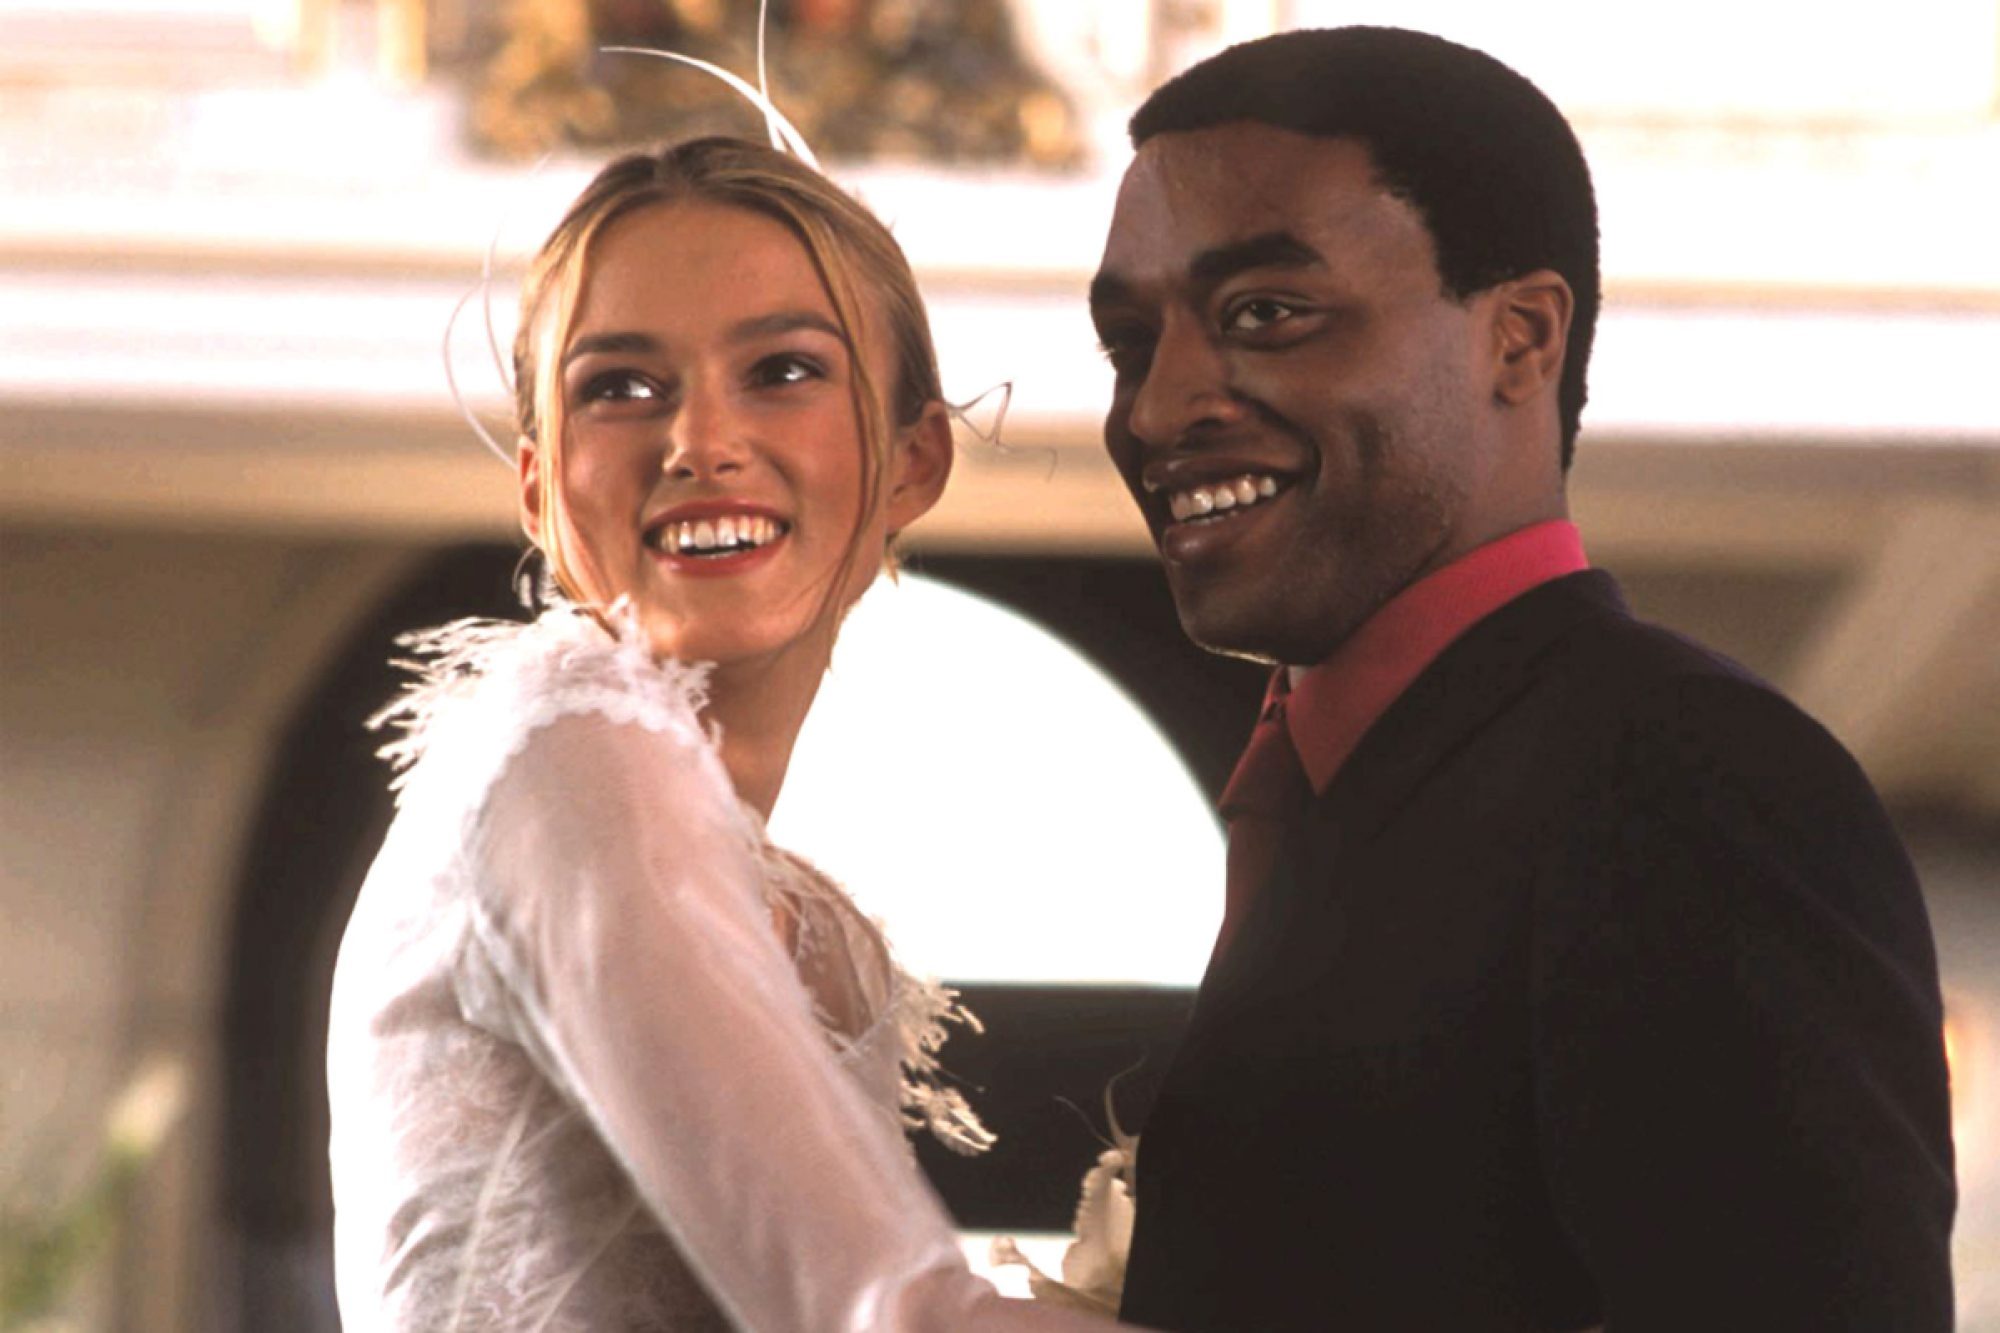 Keira Knightley and Chiwetel Ejiofor in love actually